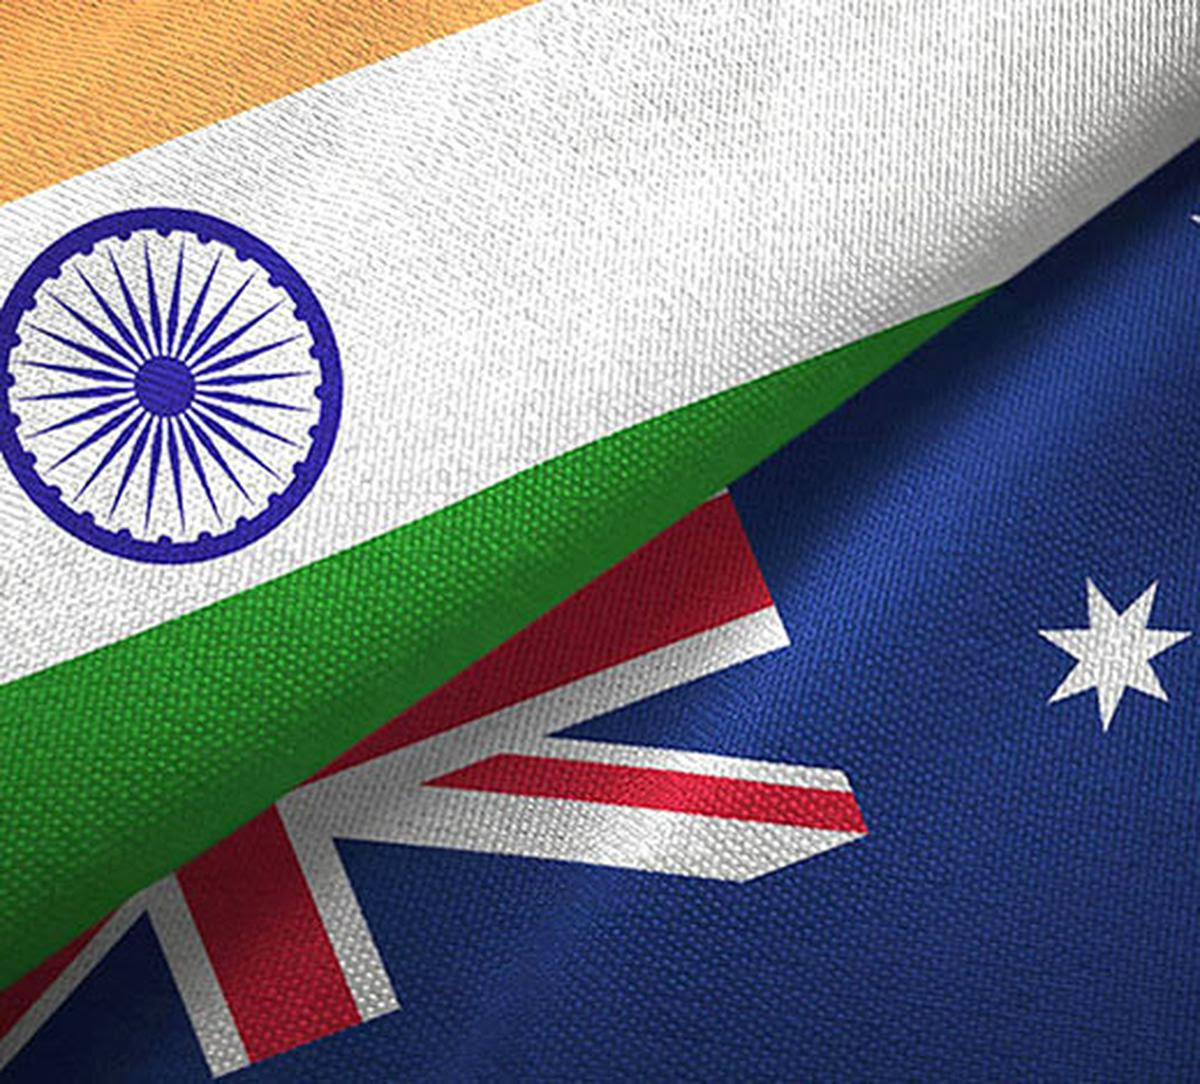 The Indian government has set a target of growing the two-way trade with Australia from the current $27 billion to $100 billion by 2030 | Photo Credit: Oleksii Liskonih